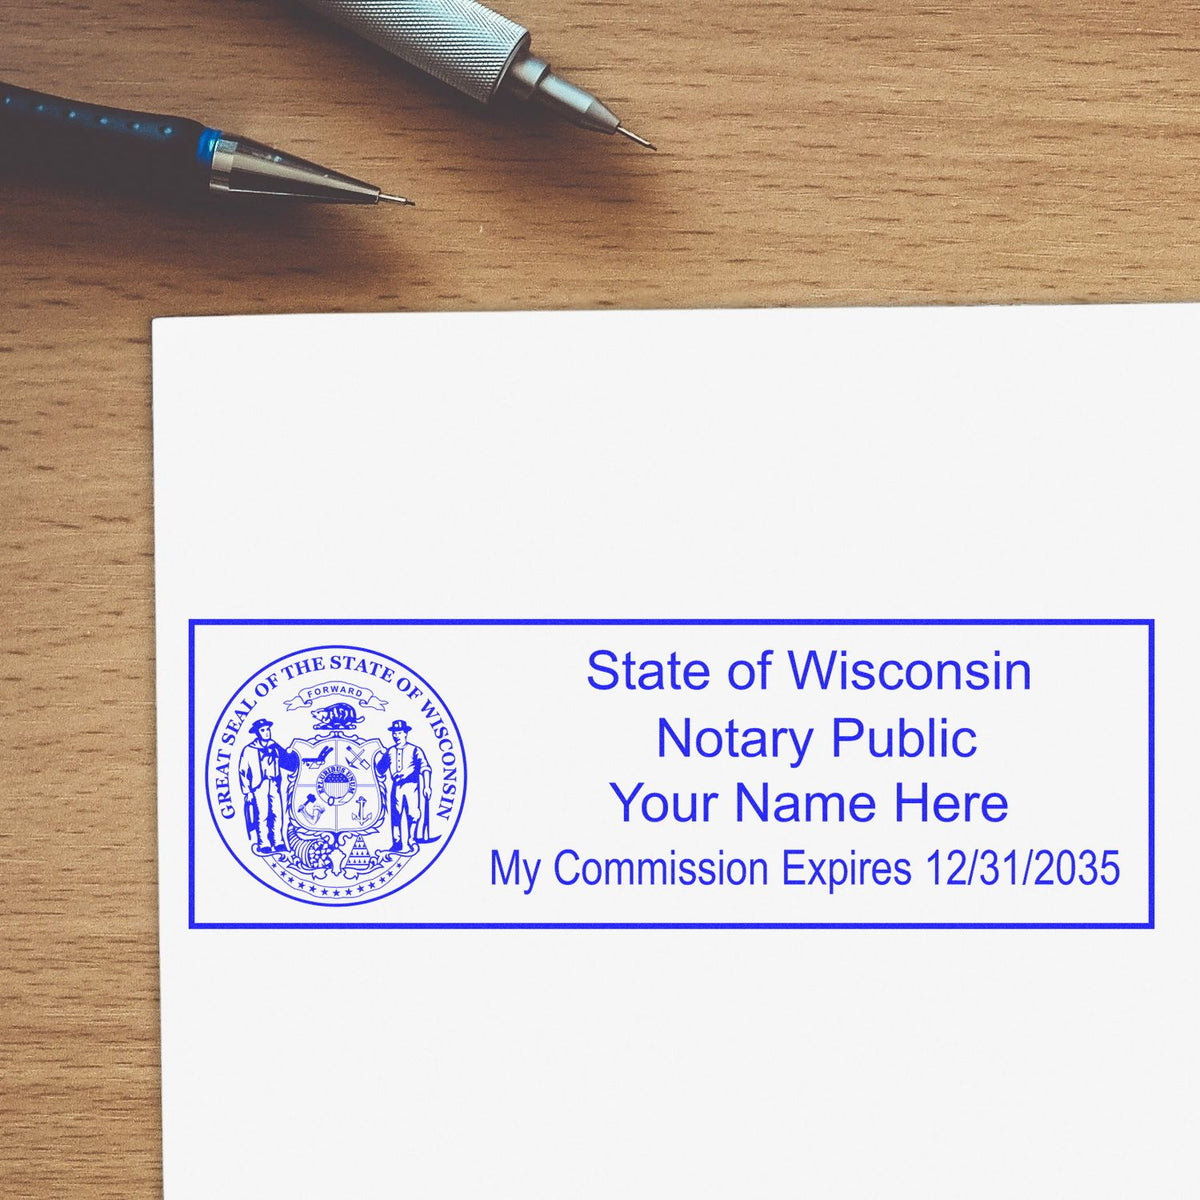 A photograph of the Heavy-Duty Wisconsin Rectangular Notary Stamp stamp impression reveals a vivid, professional image of the on paper.